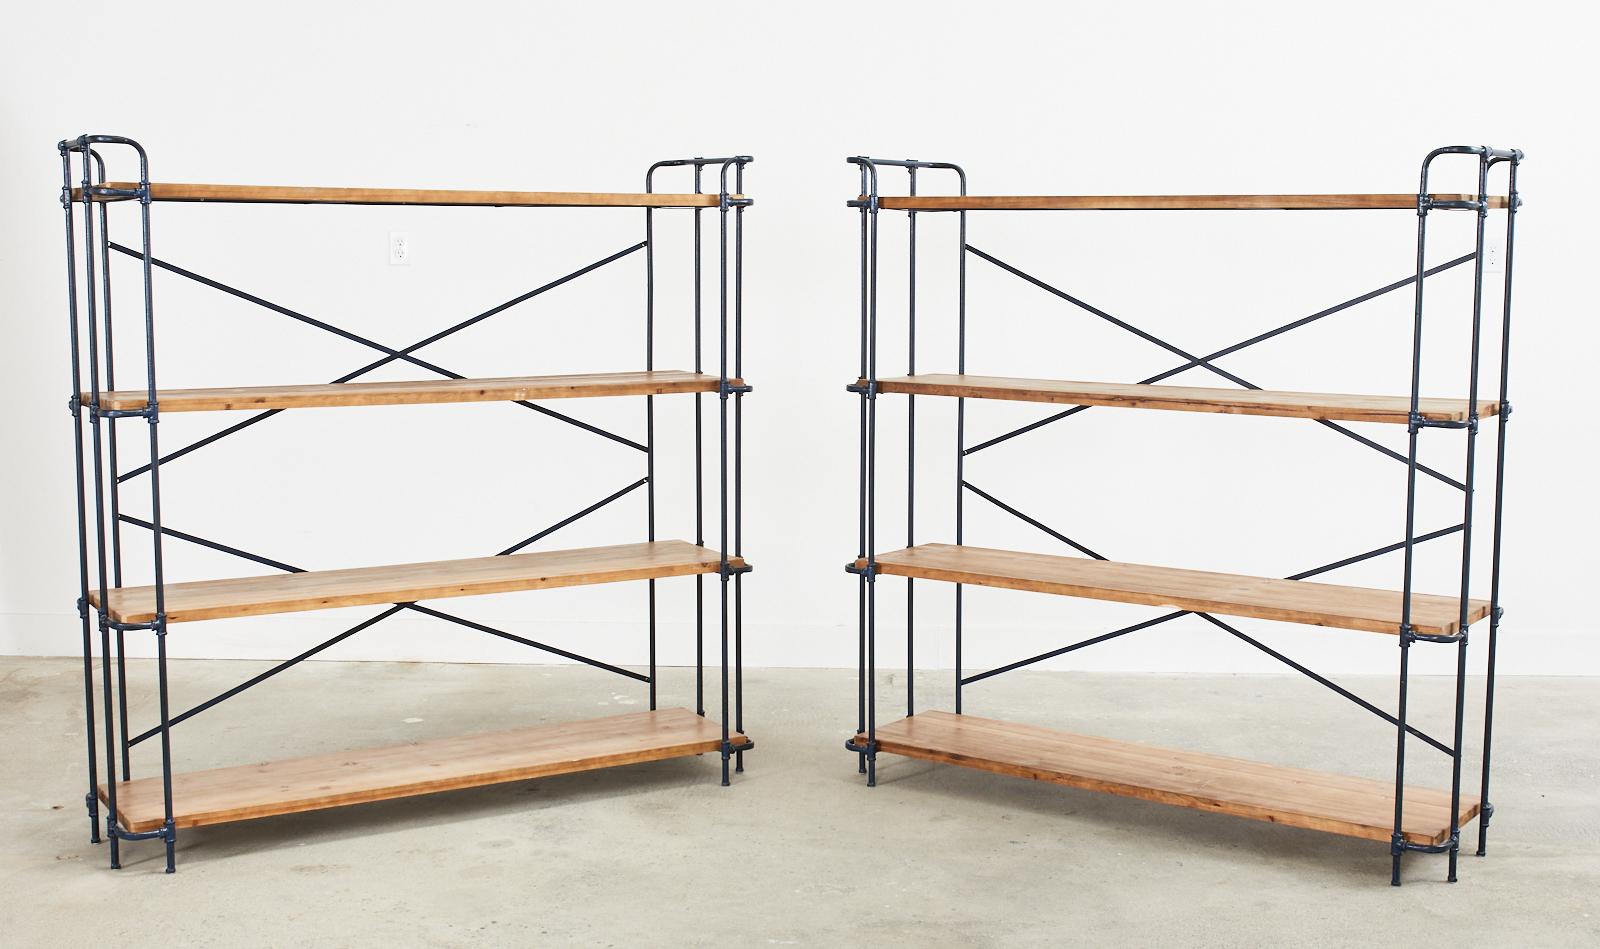 Large pair of handsome metal and pine bookshelves or bookcases made in the industrial style. The frames are constructed from vintage style metal pipes and pipe joints having an intentionally aged painted patina. The top shelf has a galleried edge